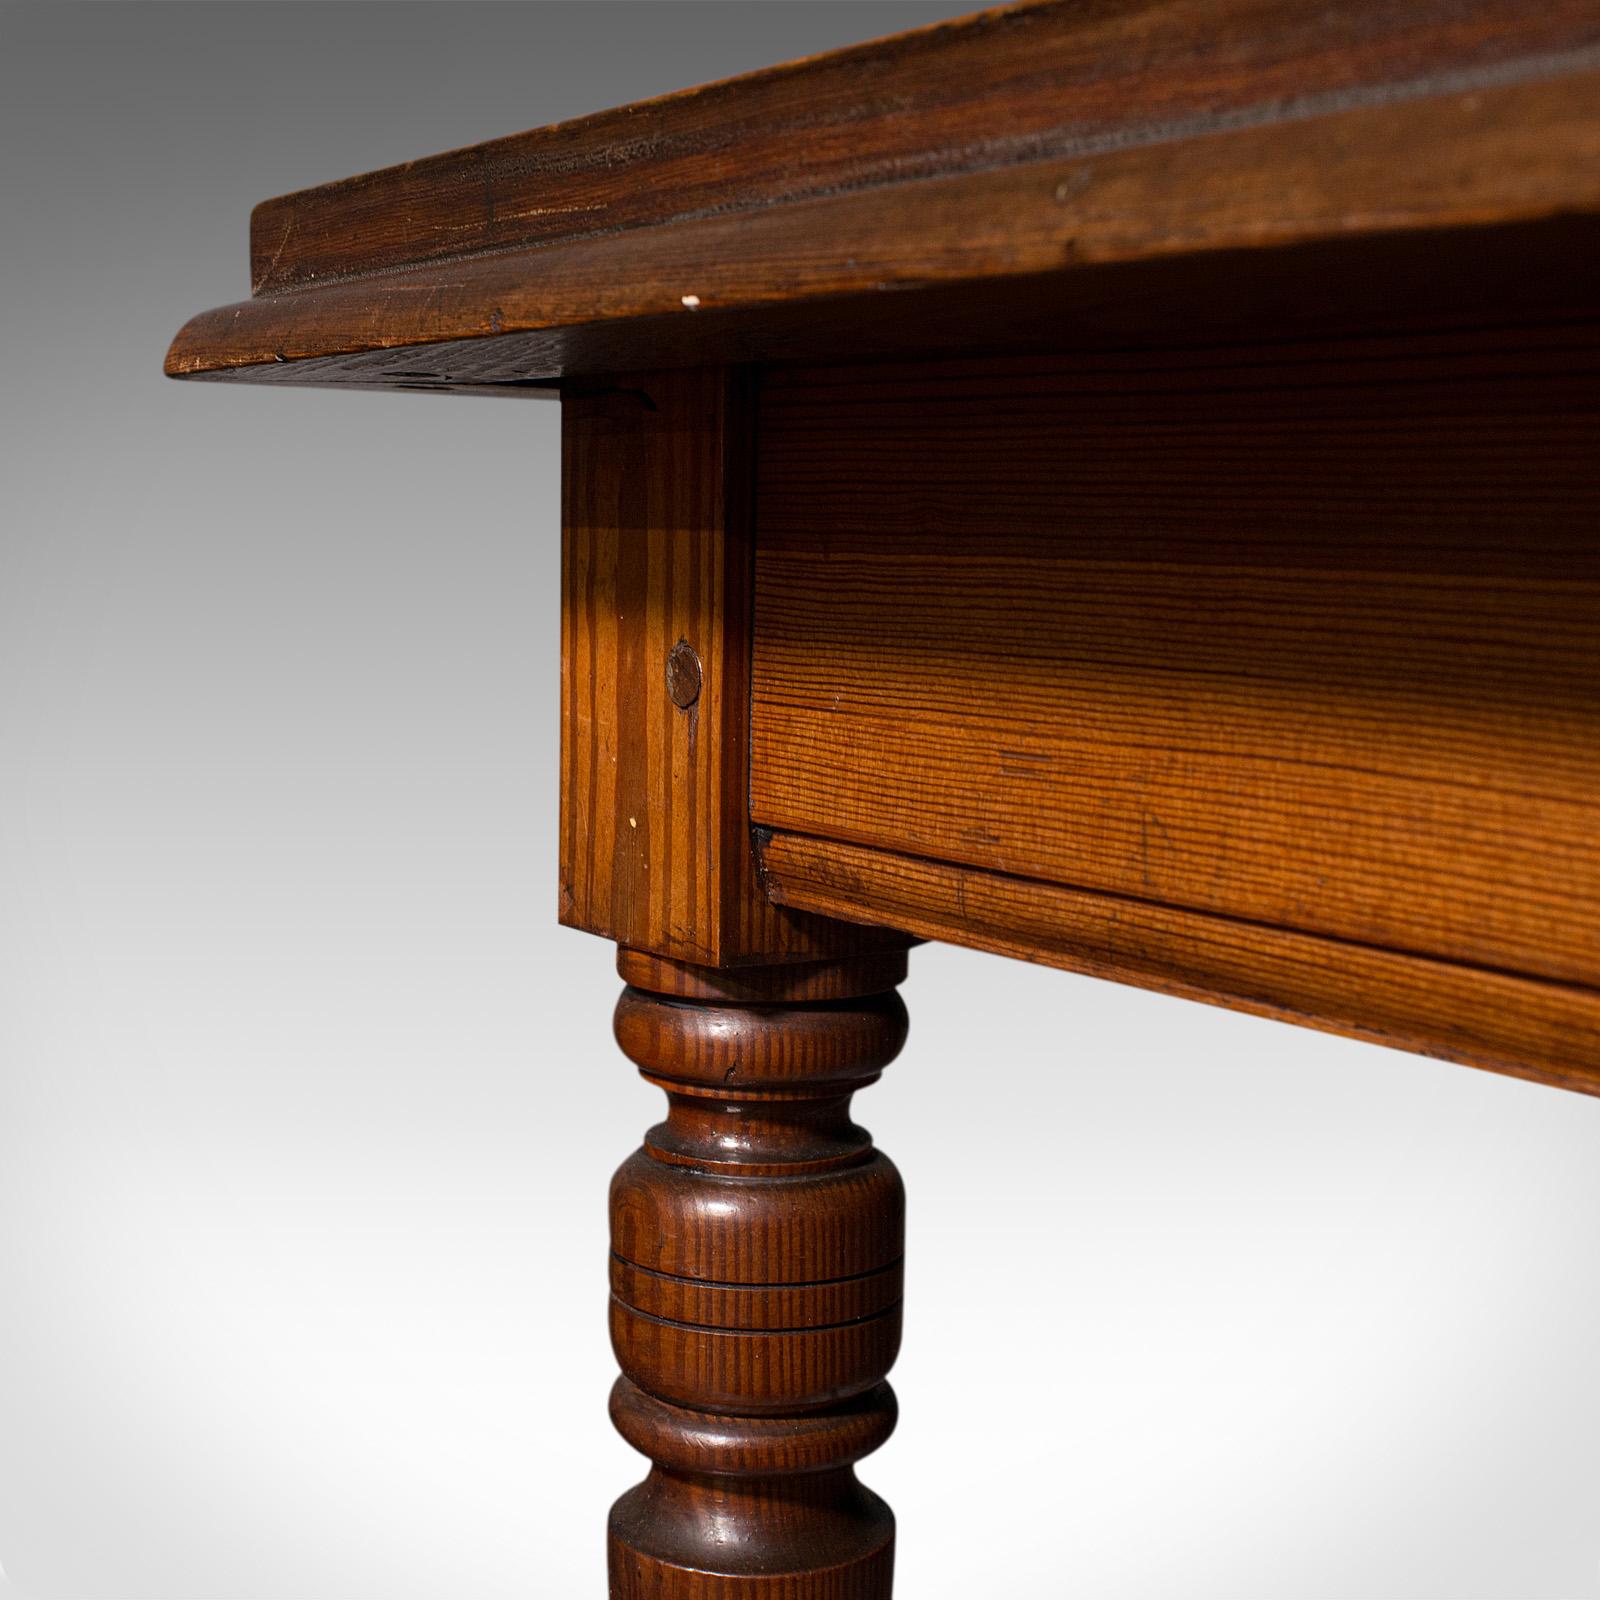 Antique Console Table, English, Pine, Ecclesiastical, Side, Victorian, C.1880 For Sale 4